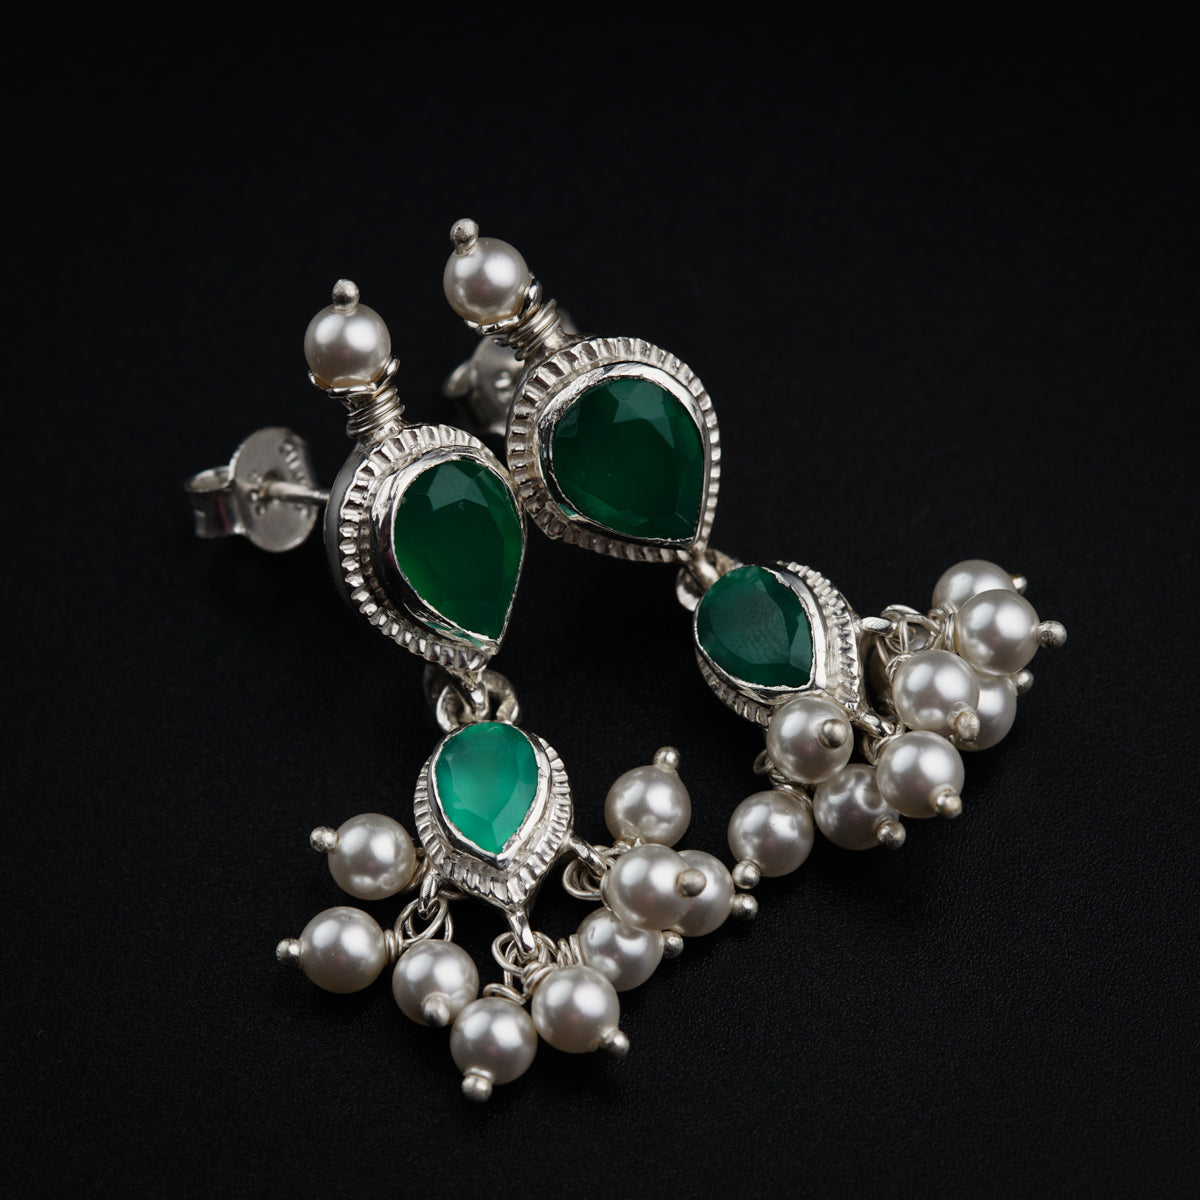 a pair of green and white earrings on a black background